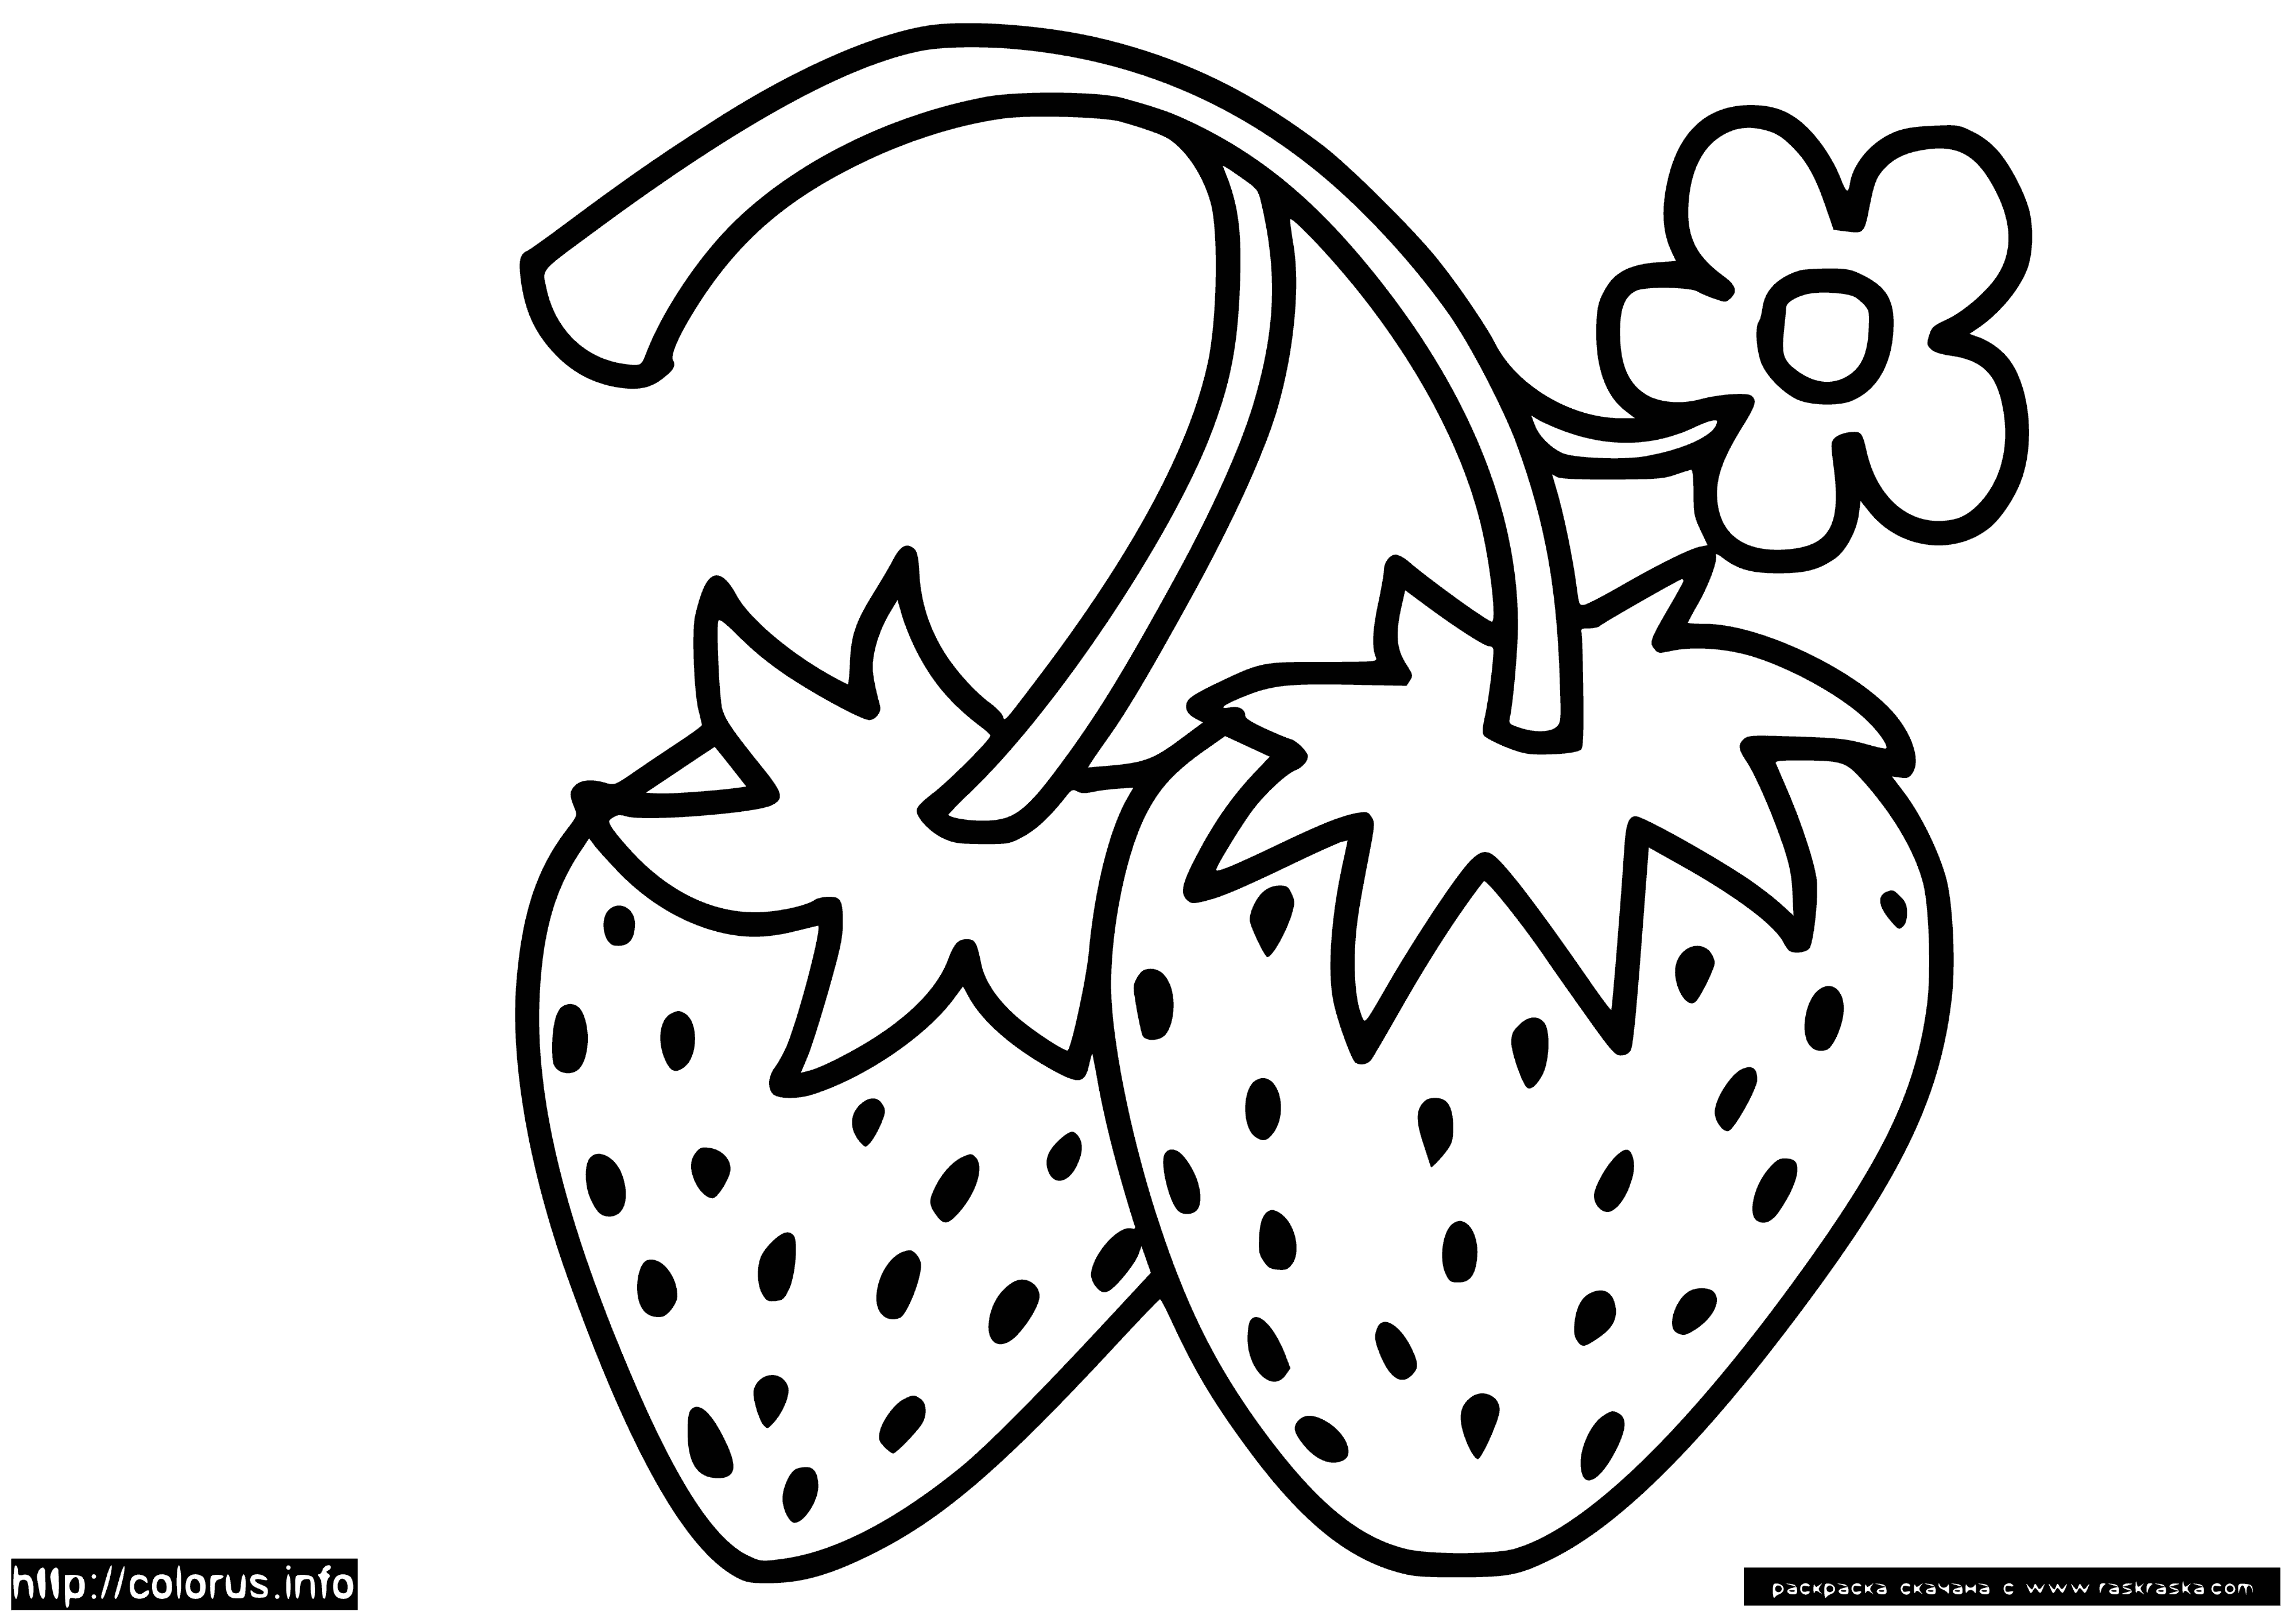 coloring page: A red strawberry with white seeds and green leaves.